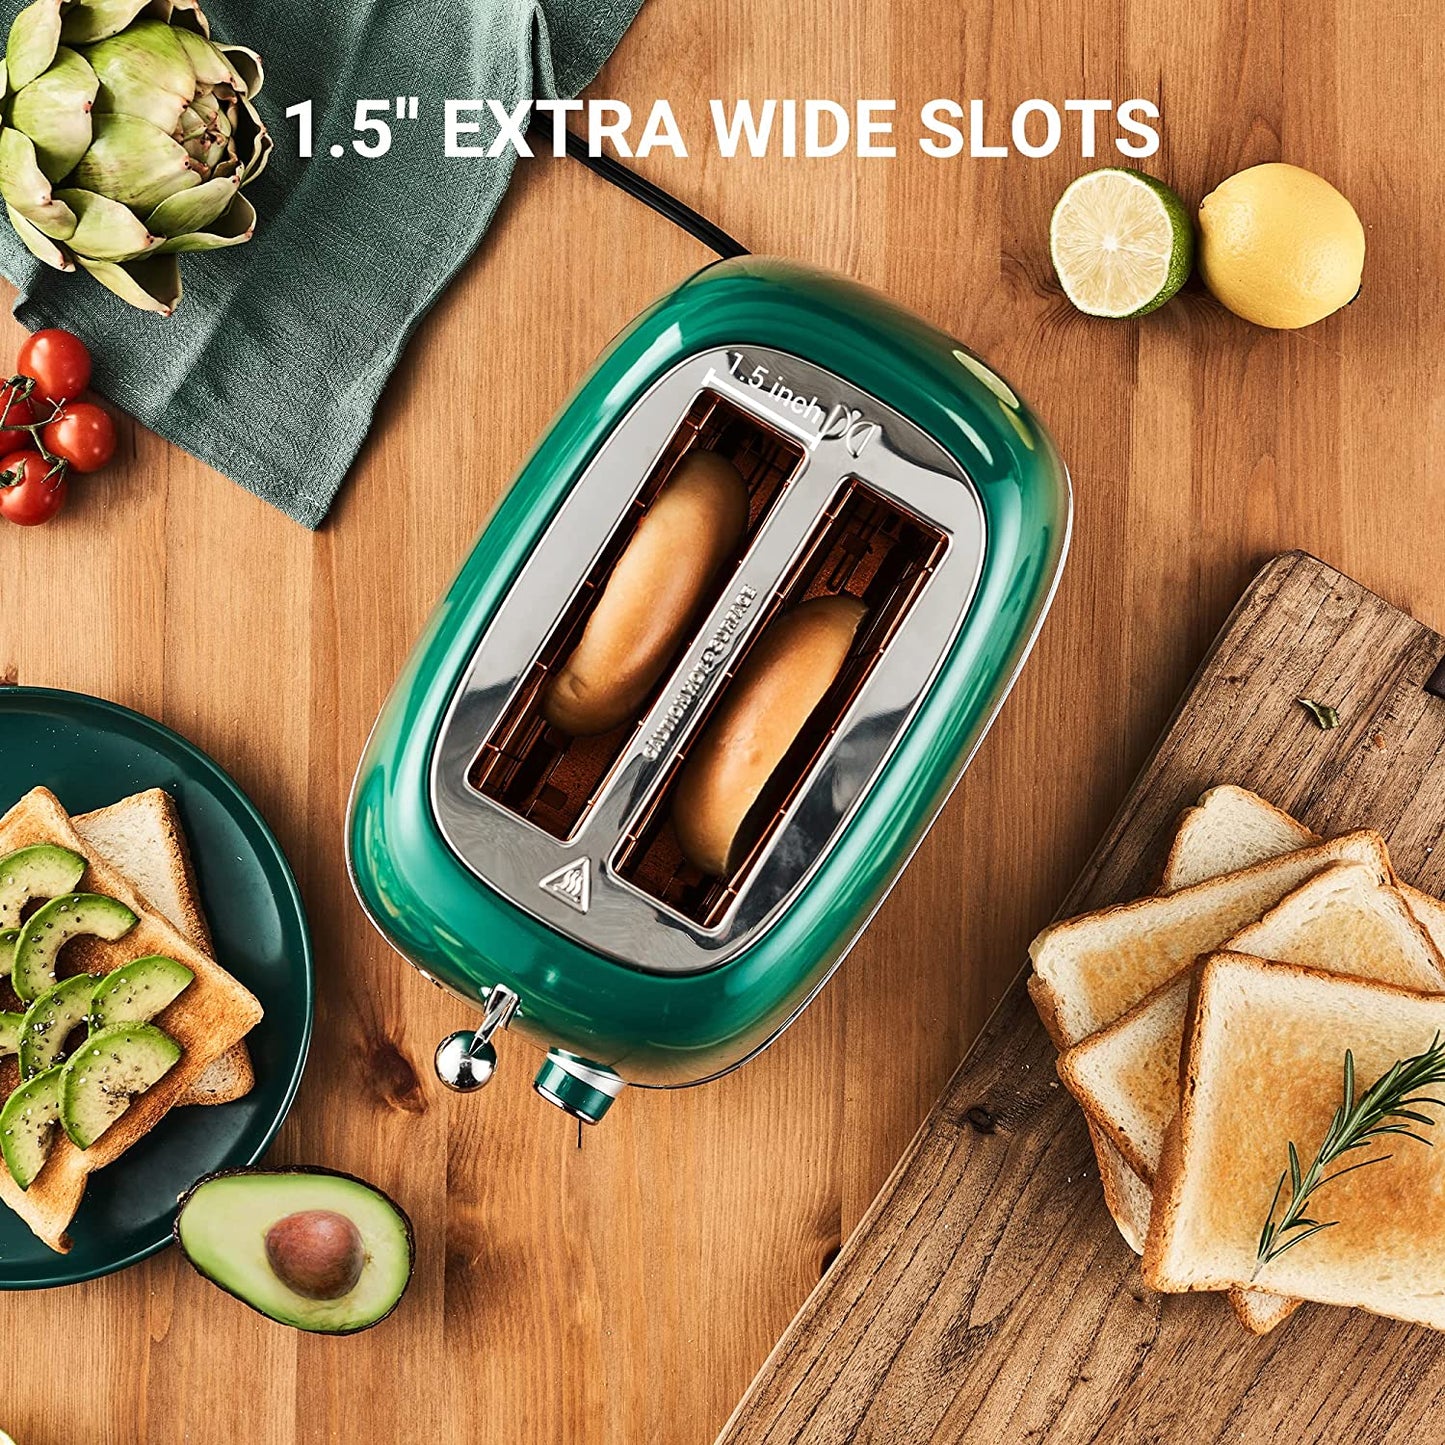 2 Slice Retro Stainless Steel Toaster with Bagel, Cancel, Defrost Function and 6 Bread Shade Settings, Extra Wide Slot, Removable Crumb Tray, Green, ST028.